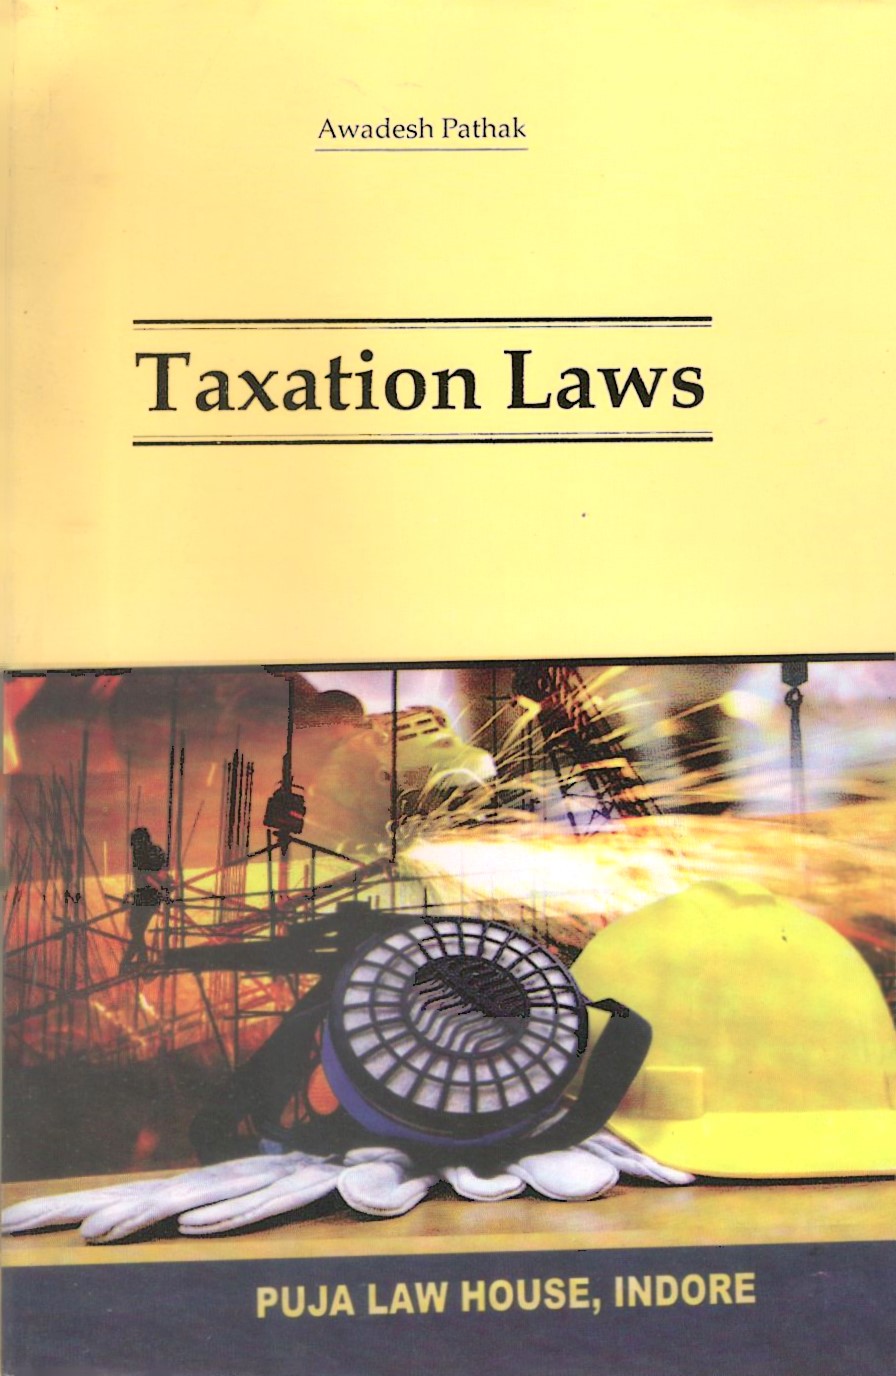 PLS – Law of Taxation